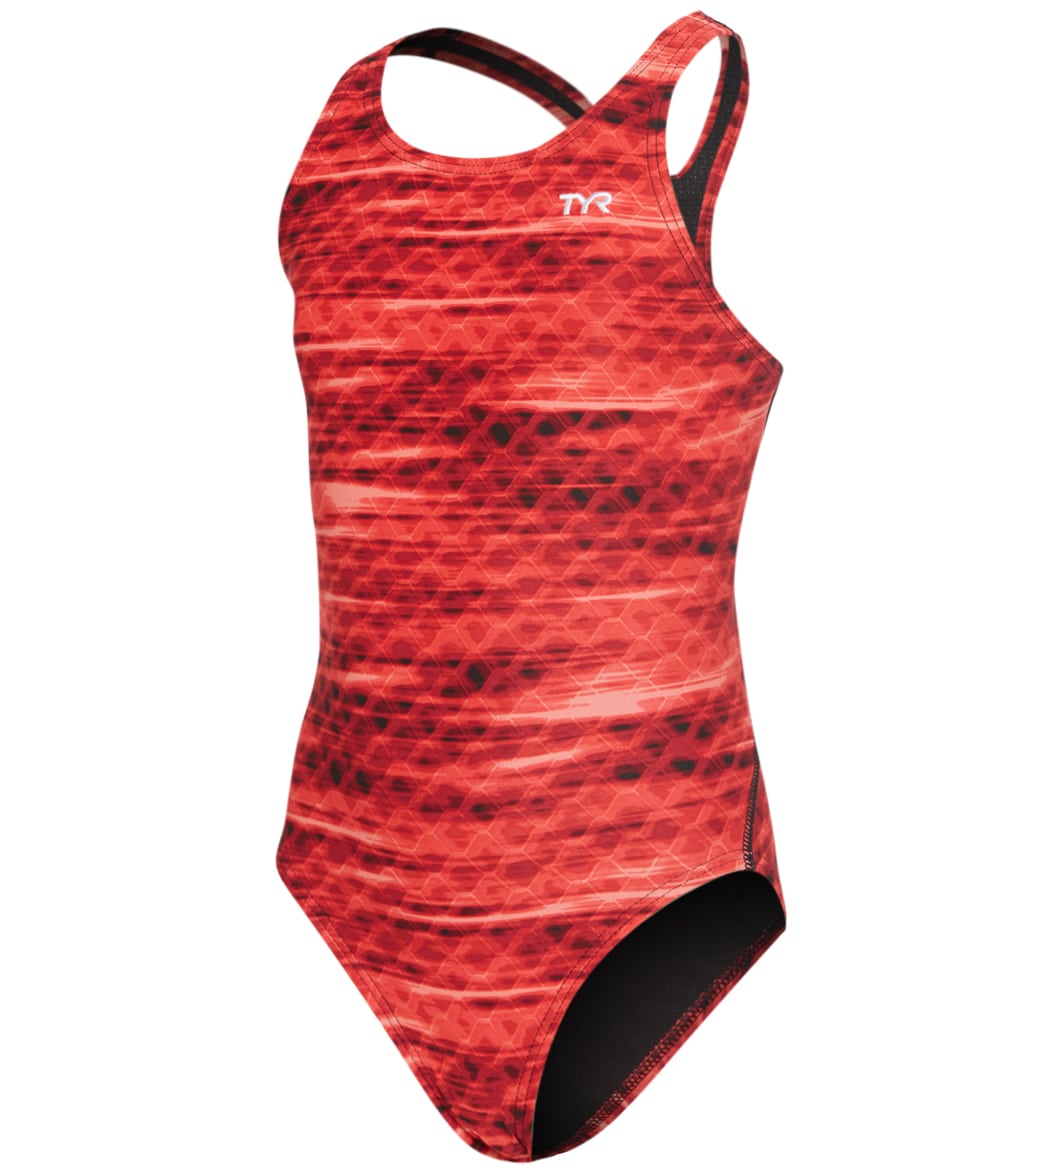 TYR Girls' Castaway Maxfit One Piece Swimsuit - Red 22 - Swimoutlet.com